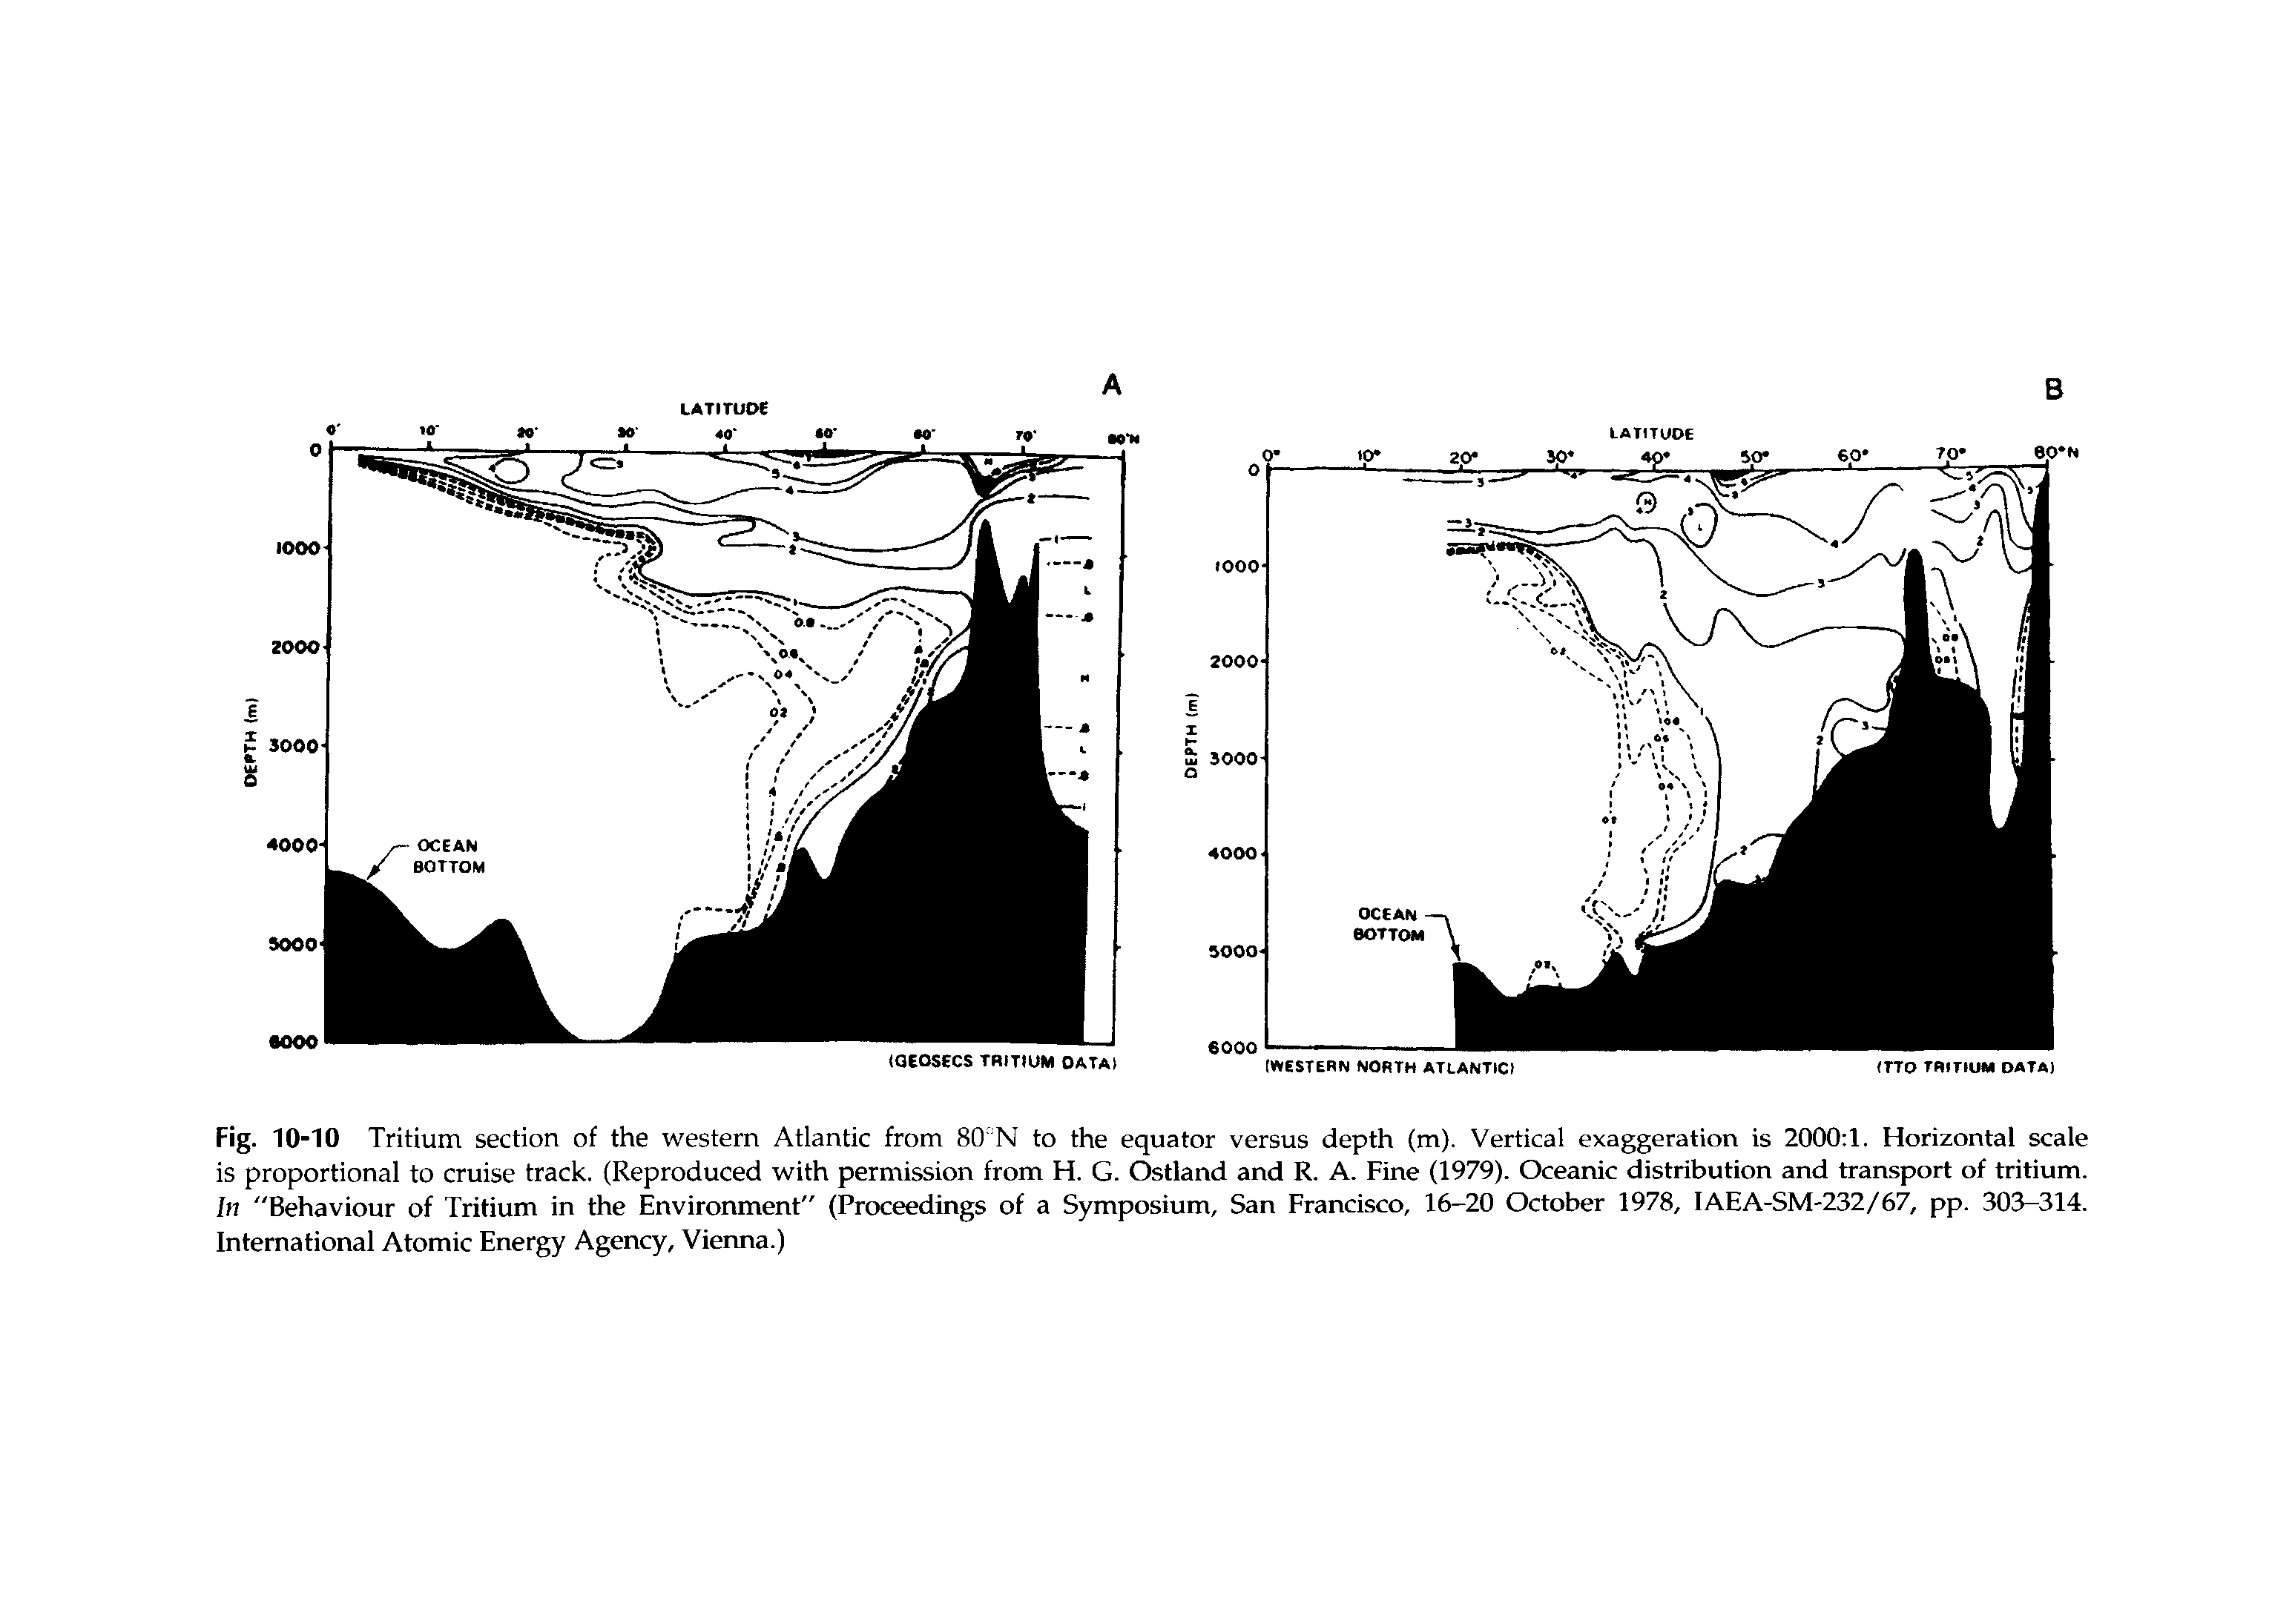 Fig. 10-10 Tritium section of the western Atlantic from 80 N to the equator versus depth (m). Vertical exaggeration is 2000 1. Horizontal scale is proportional to cruise track. (Reproduced with permission from H. G. Ostland and R. A. Fine (1979). Oceanic distribution and transport of tritium. In Behaviour of Tritium in the Environment" (Proceedings of a Symposium, San Francisco, 16-20 October 1978, IAEA-SM-232/67, pp. 303-314. International Atomic Energy Agency, Vienna.)...